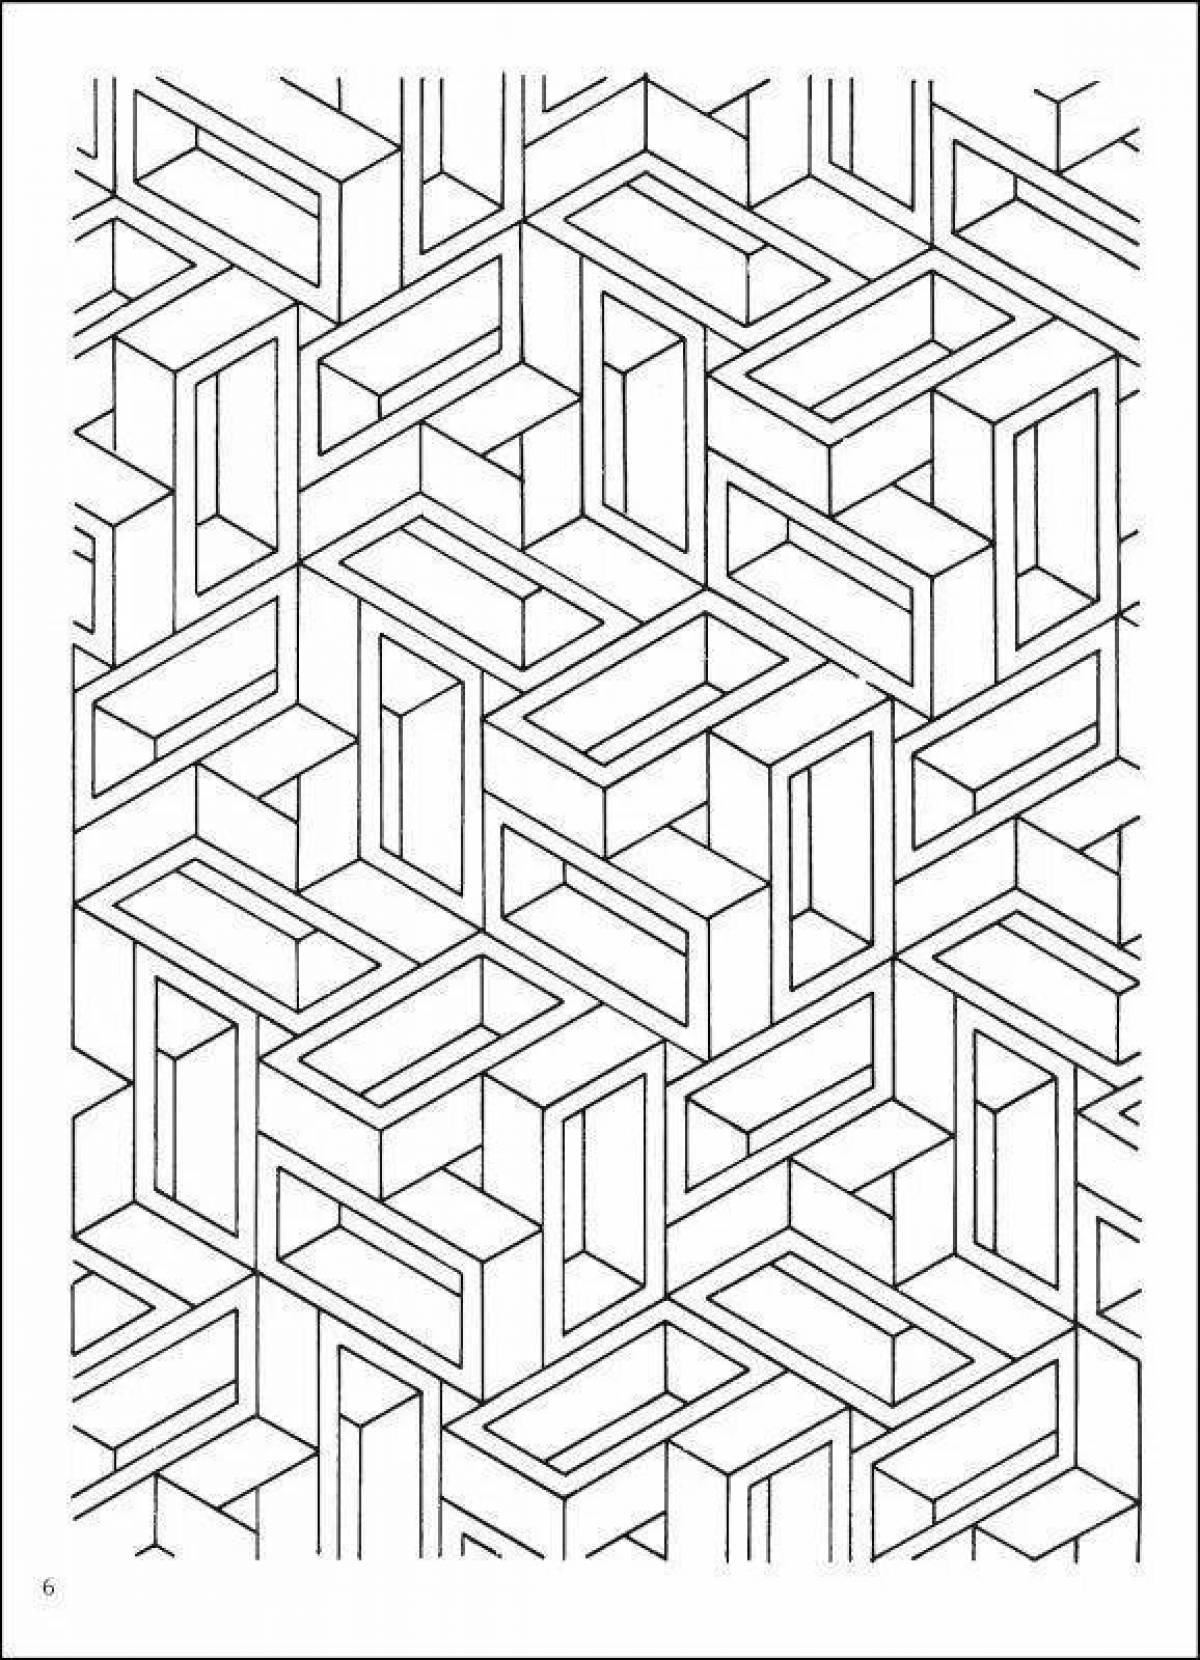 Charming illusion coloring book